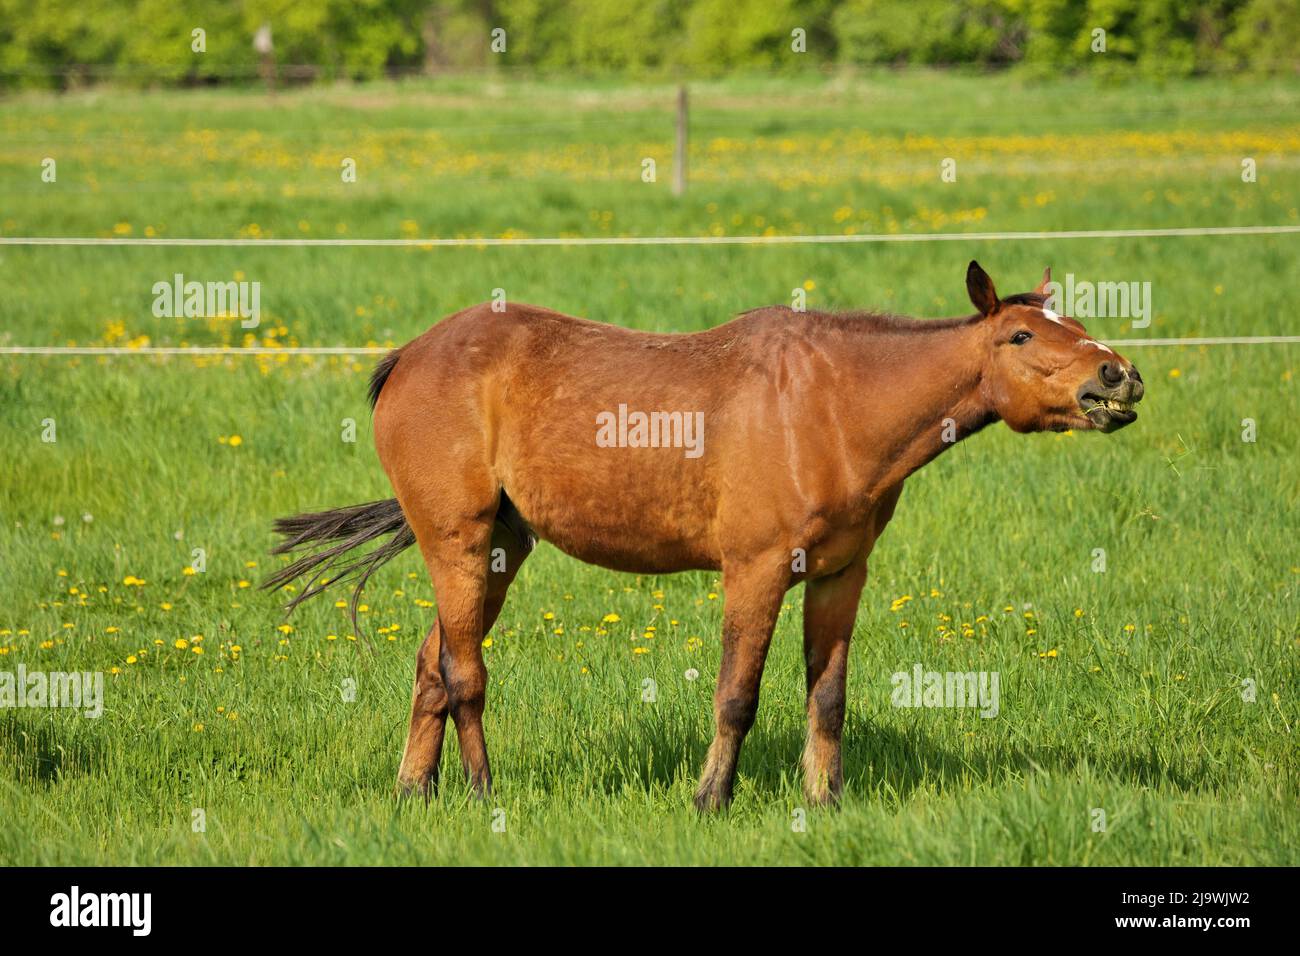 Horse Choke: a Brown Stallion with esophageal obstruction or strictures or choking on hay juts head Stock Photo